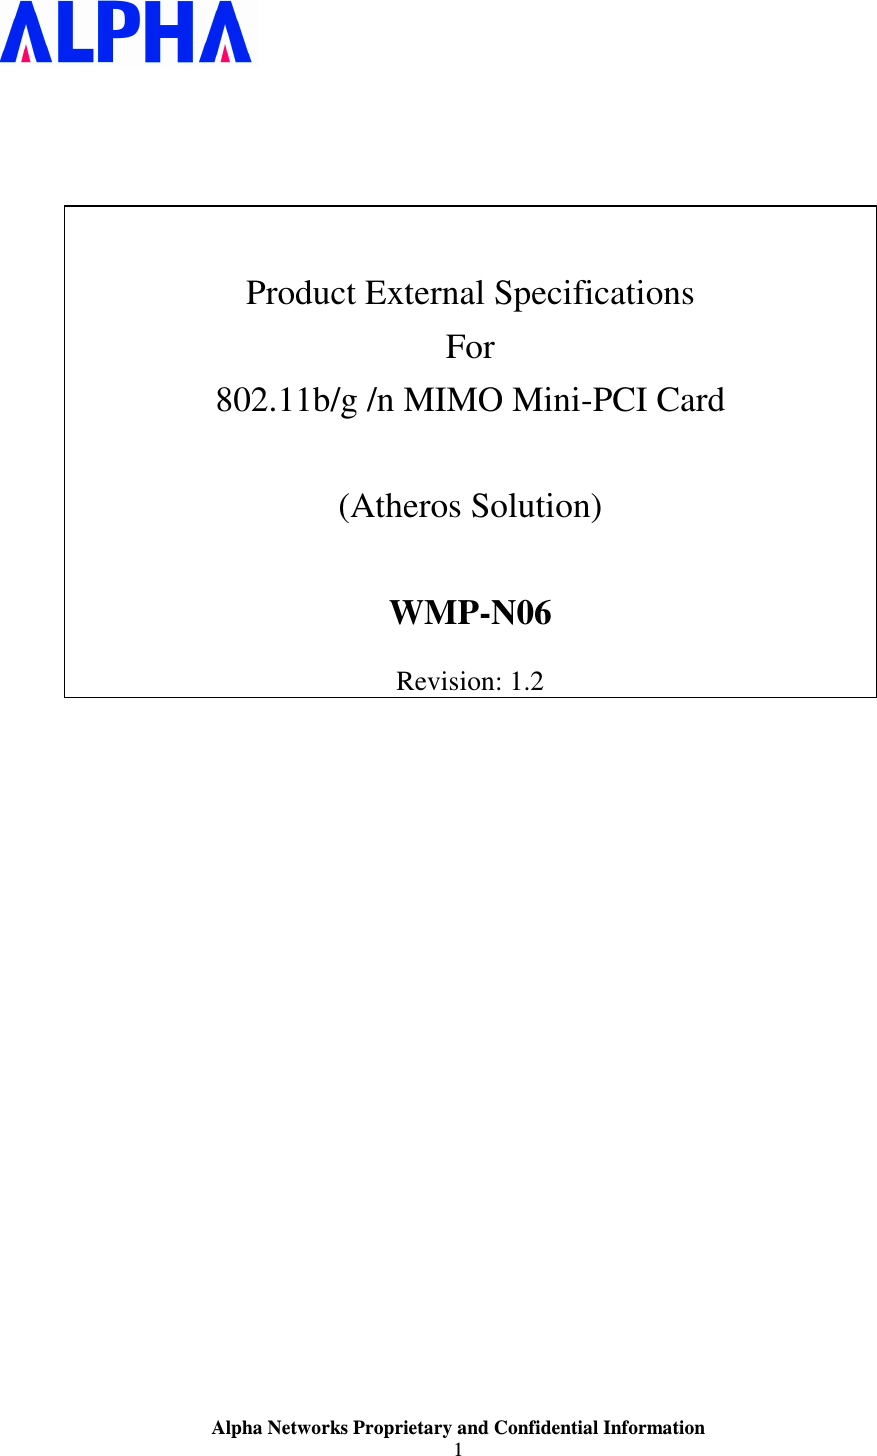                    Alpha Networks Proprietary and Confidential Information 1         Product External Specifications For 802.11b/g /n MIMO Mini-PCI Card  (Atheros Solution)  WMP-N06  Revision: 1.2 